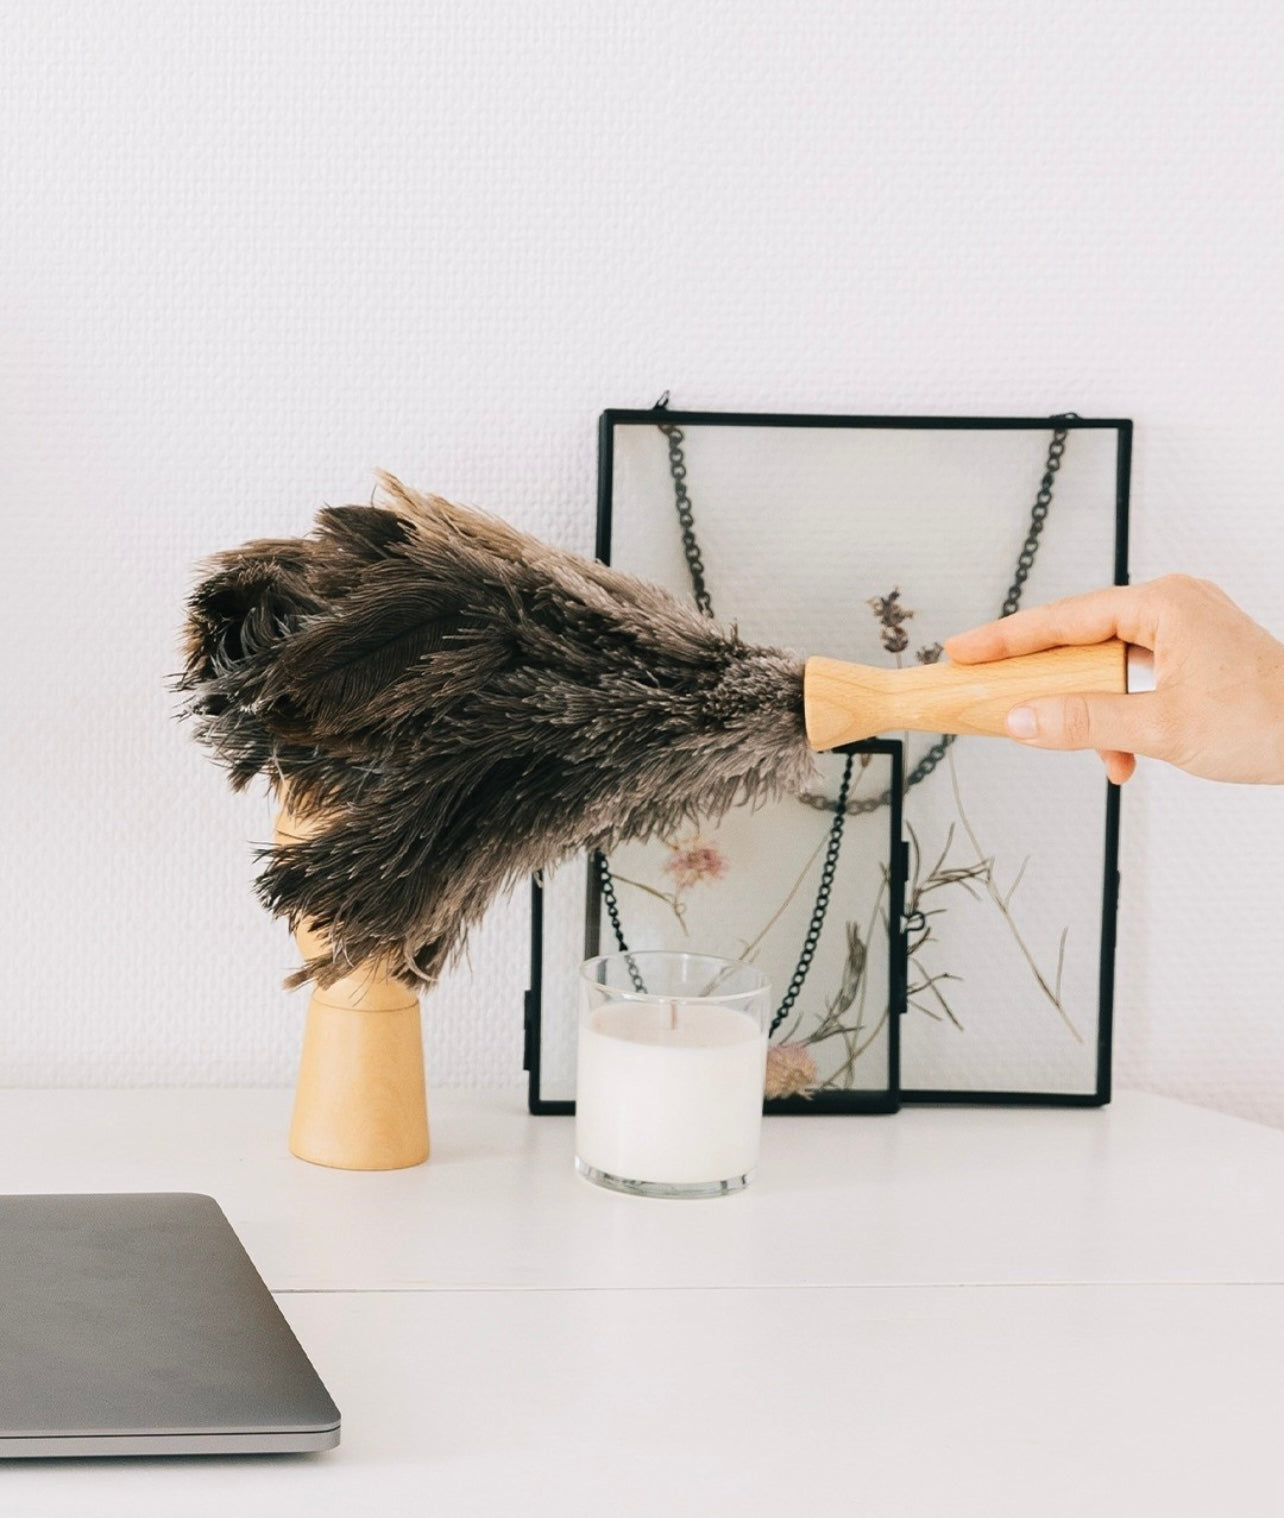 Hand holding feather duster with wooden handle next to candle, picture frame, and laptop on desk.